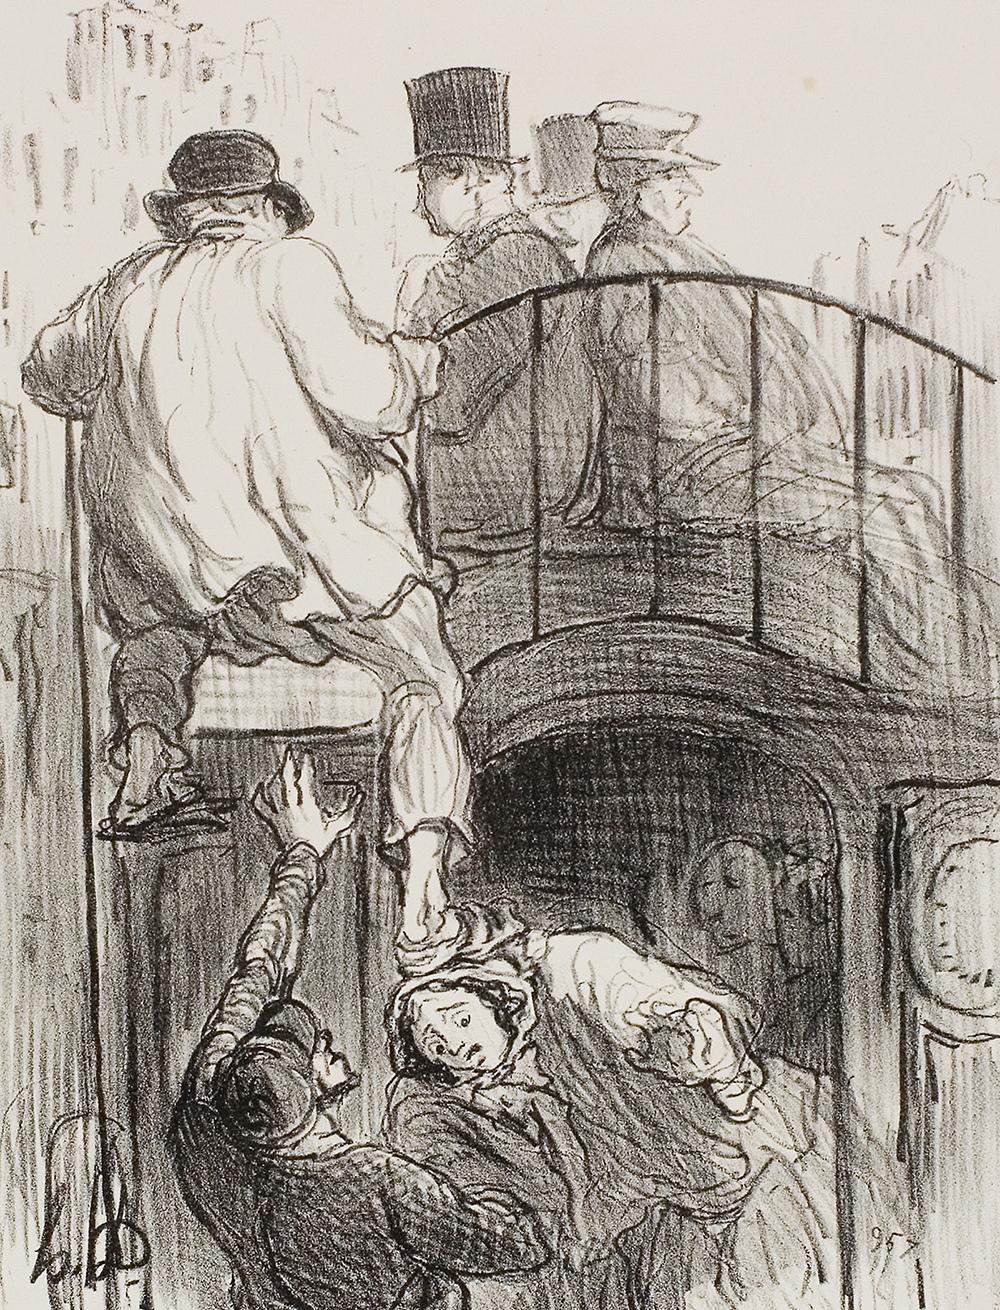 An Unpleasant Aspect of the New Type of Omnibus, by Honoré Daumier, 1856. The Art Institute of Chicago, Gift of the Print and Drawing Club.